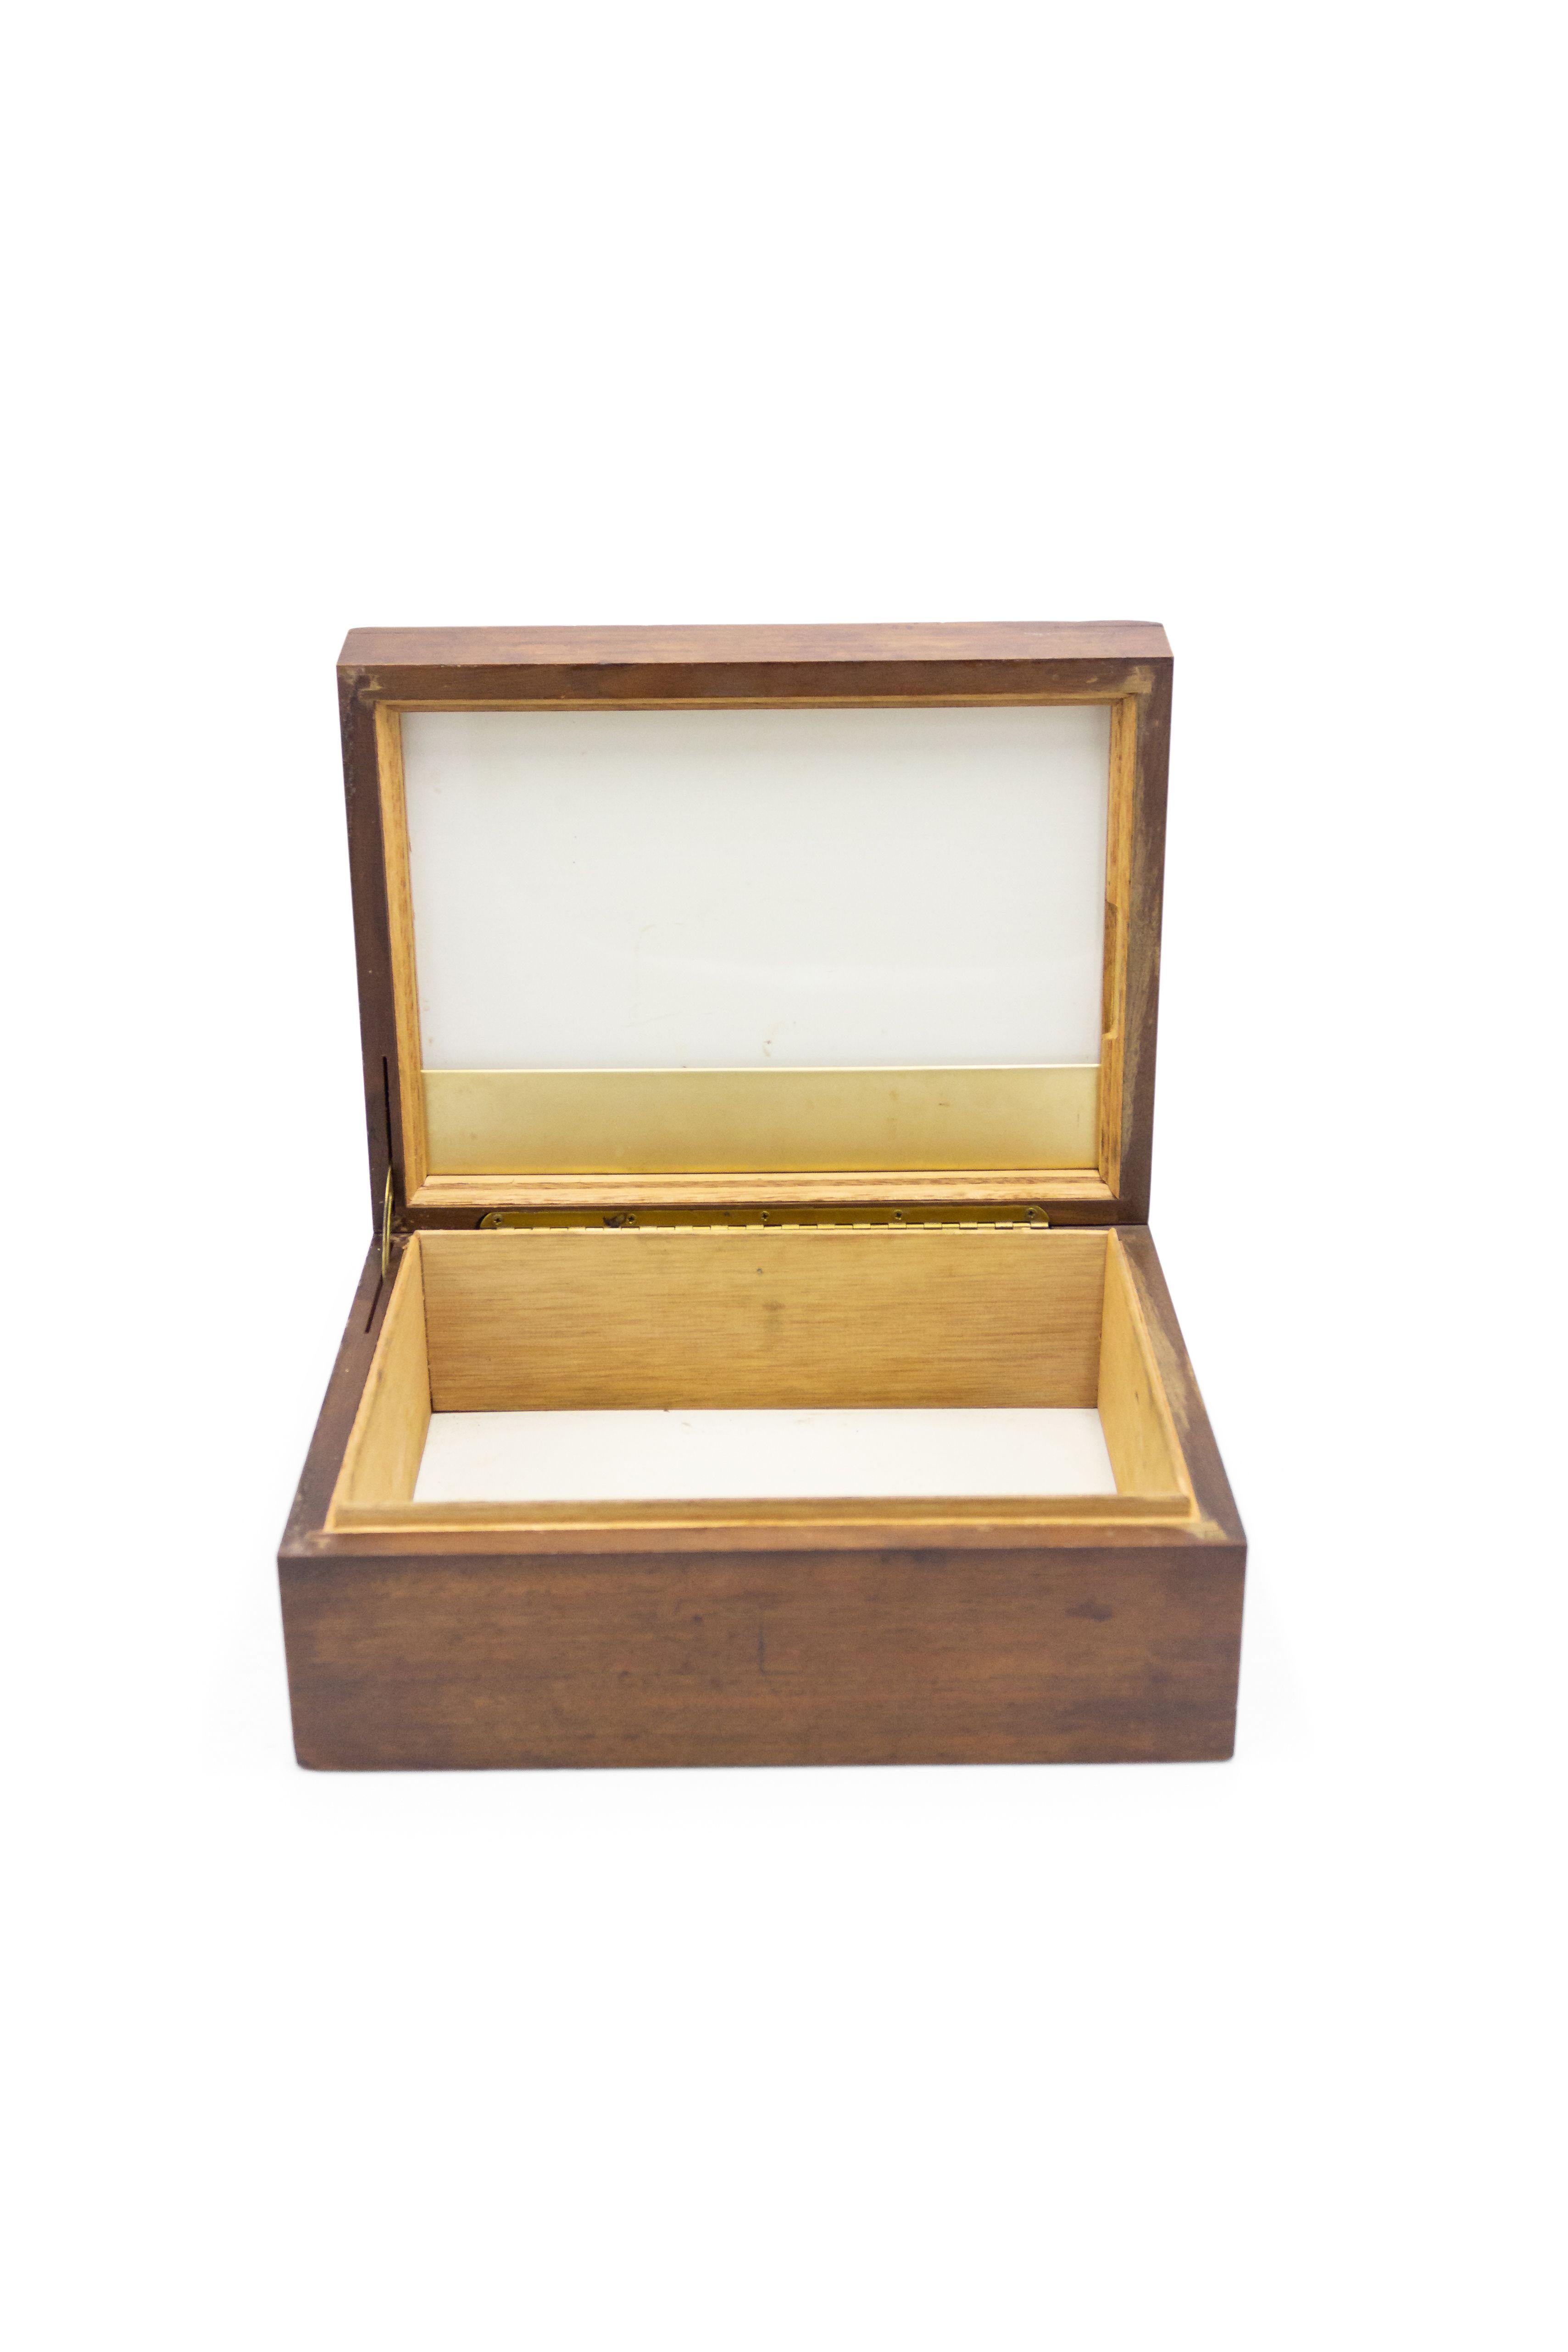 English Victorian Rosewood Box For Sale 1